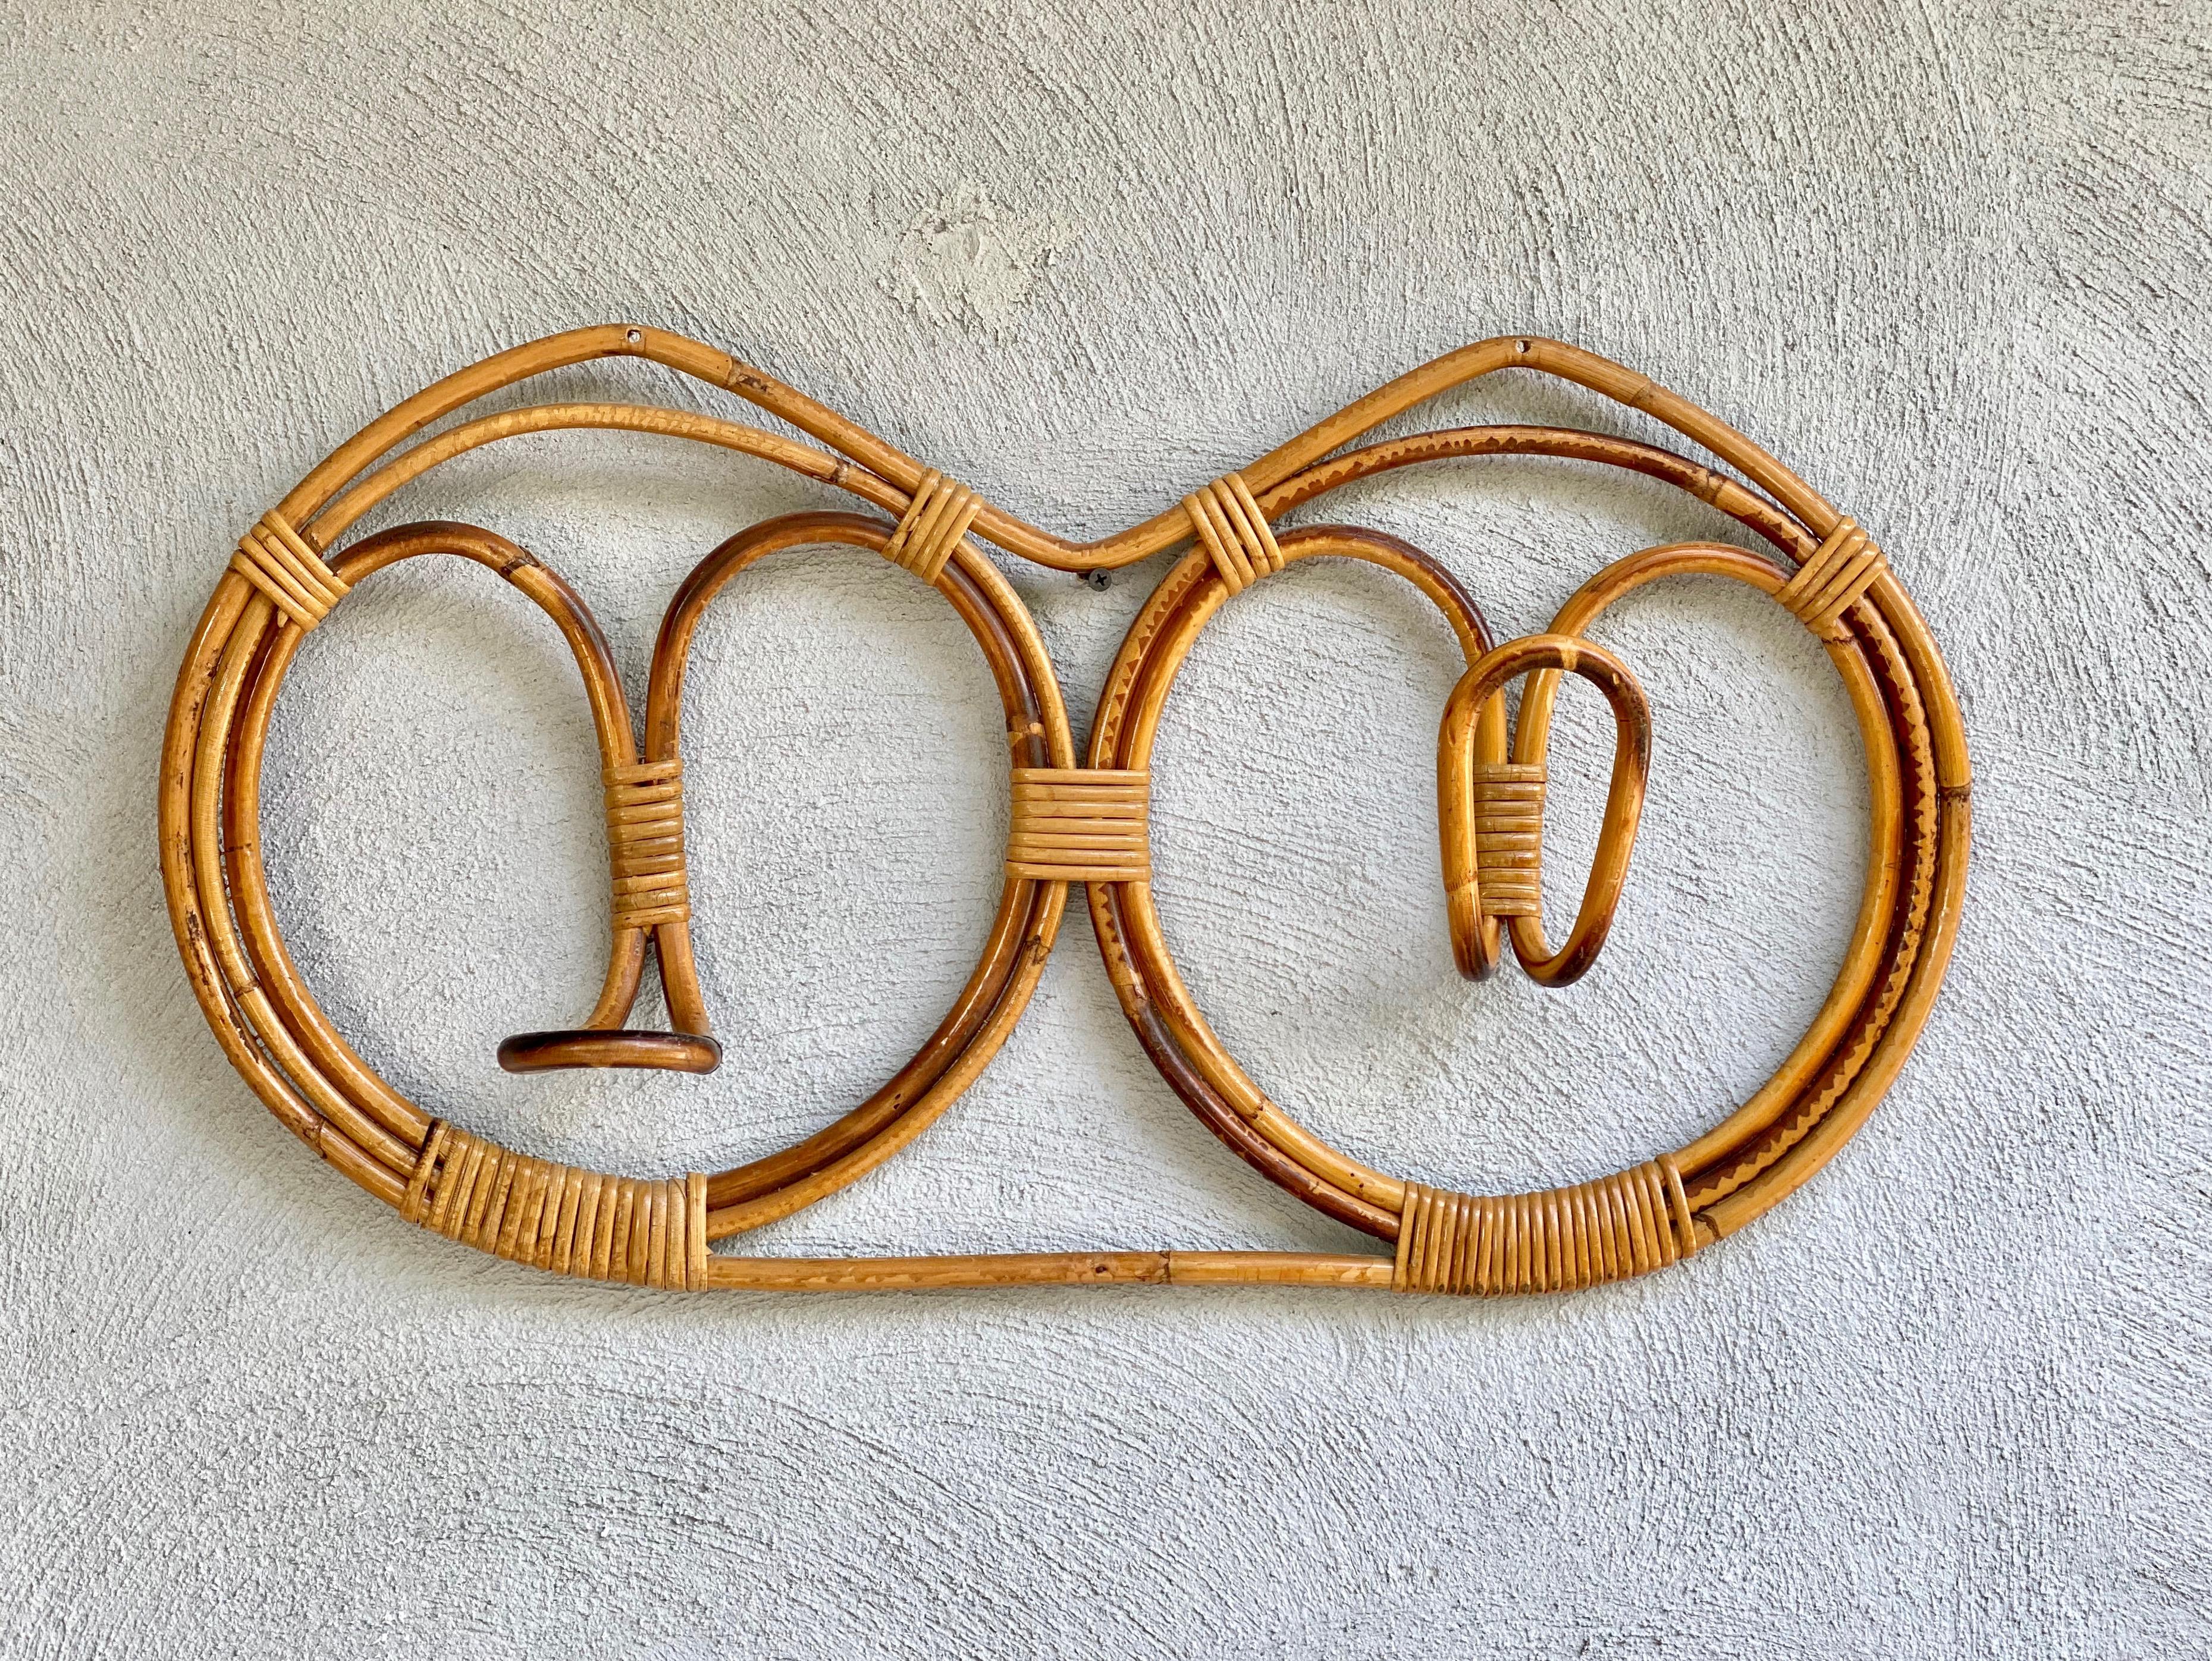 Clothes hanger in rattan by Franco Albini & Fanca Helg for Bonacina, two hooks. Made in Italy, circa 1960.